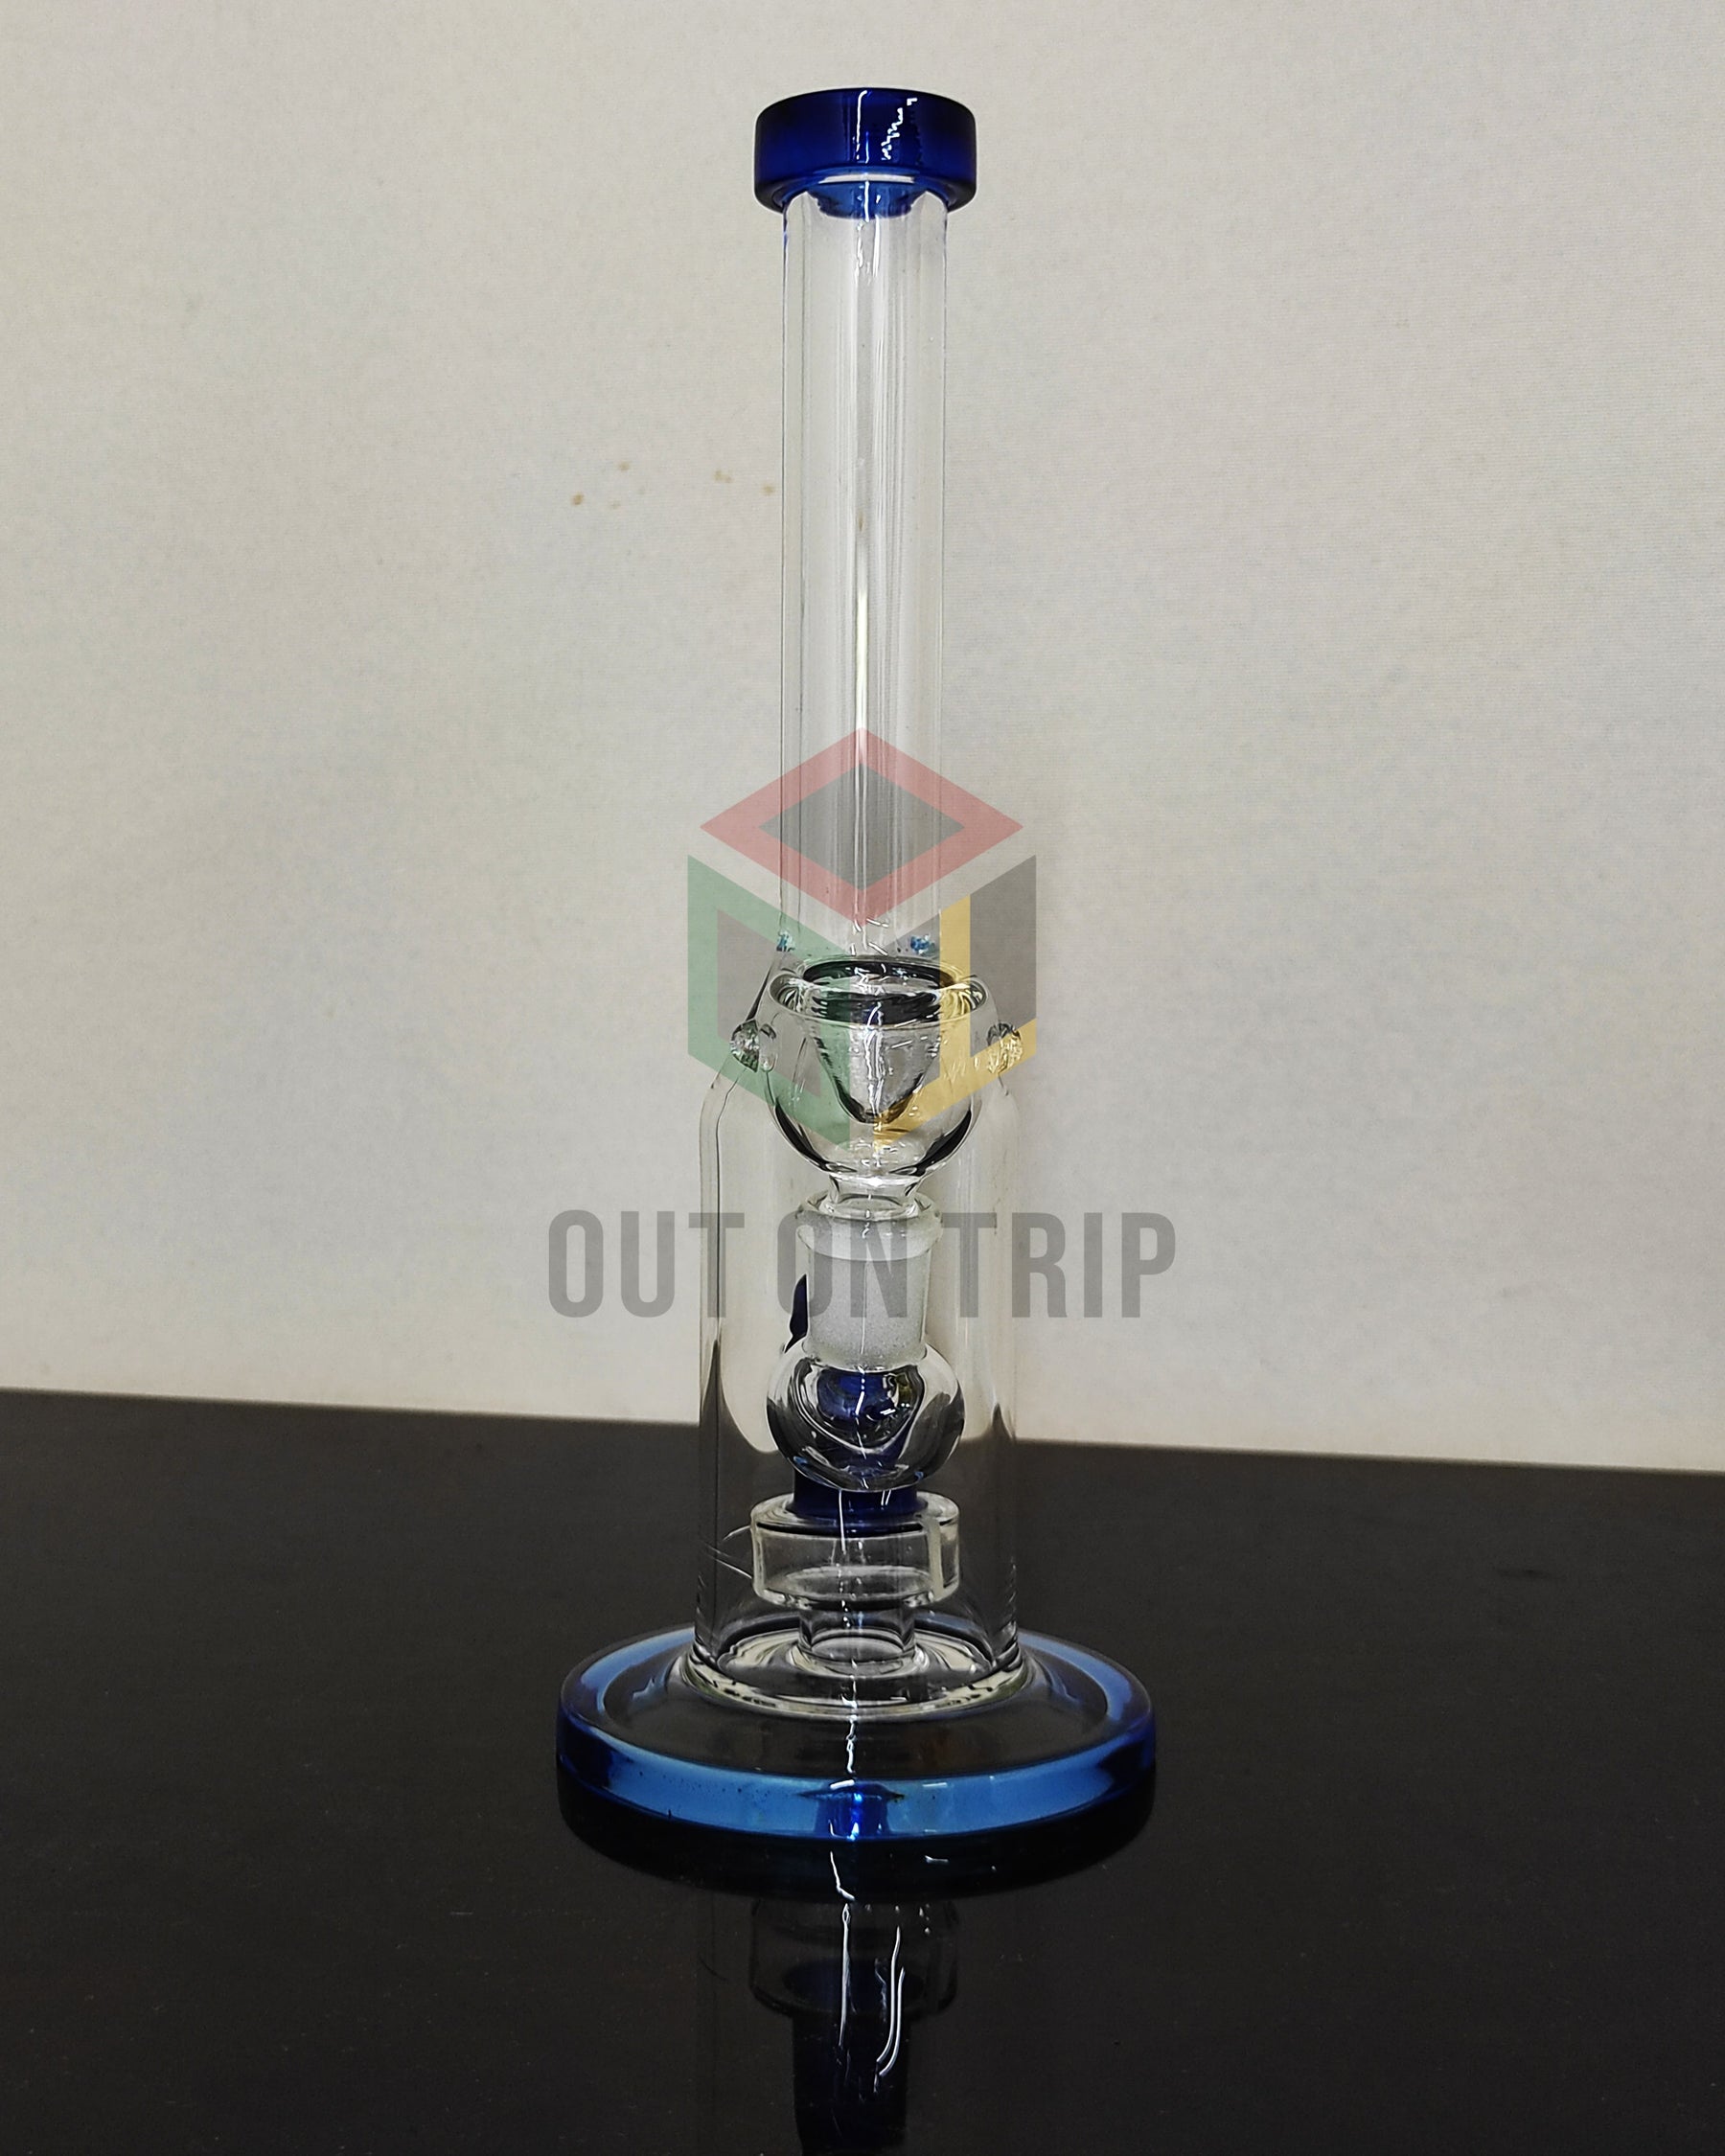 10 Inch Can  Assorted Colors Bong with UFO Percolator